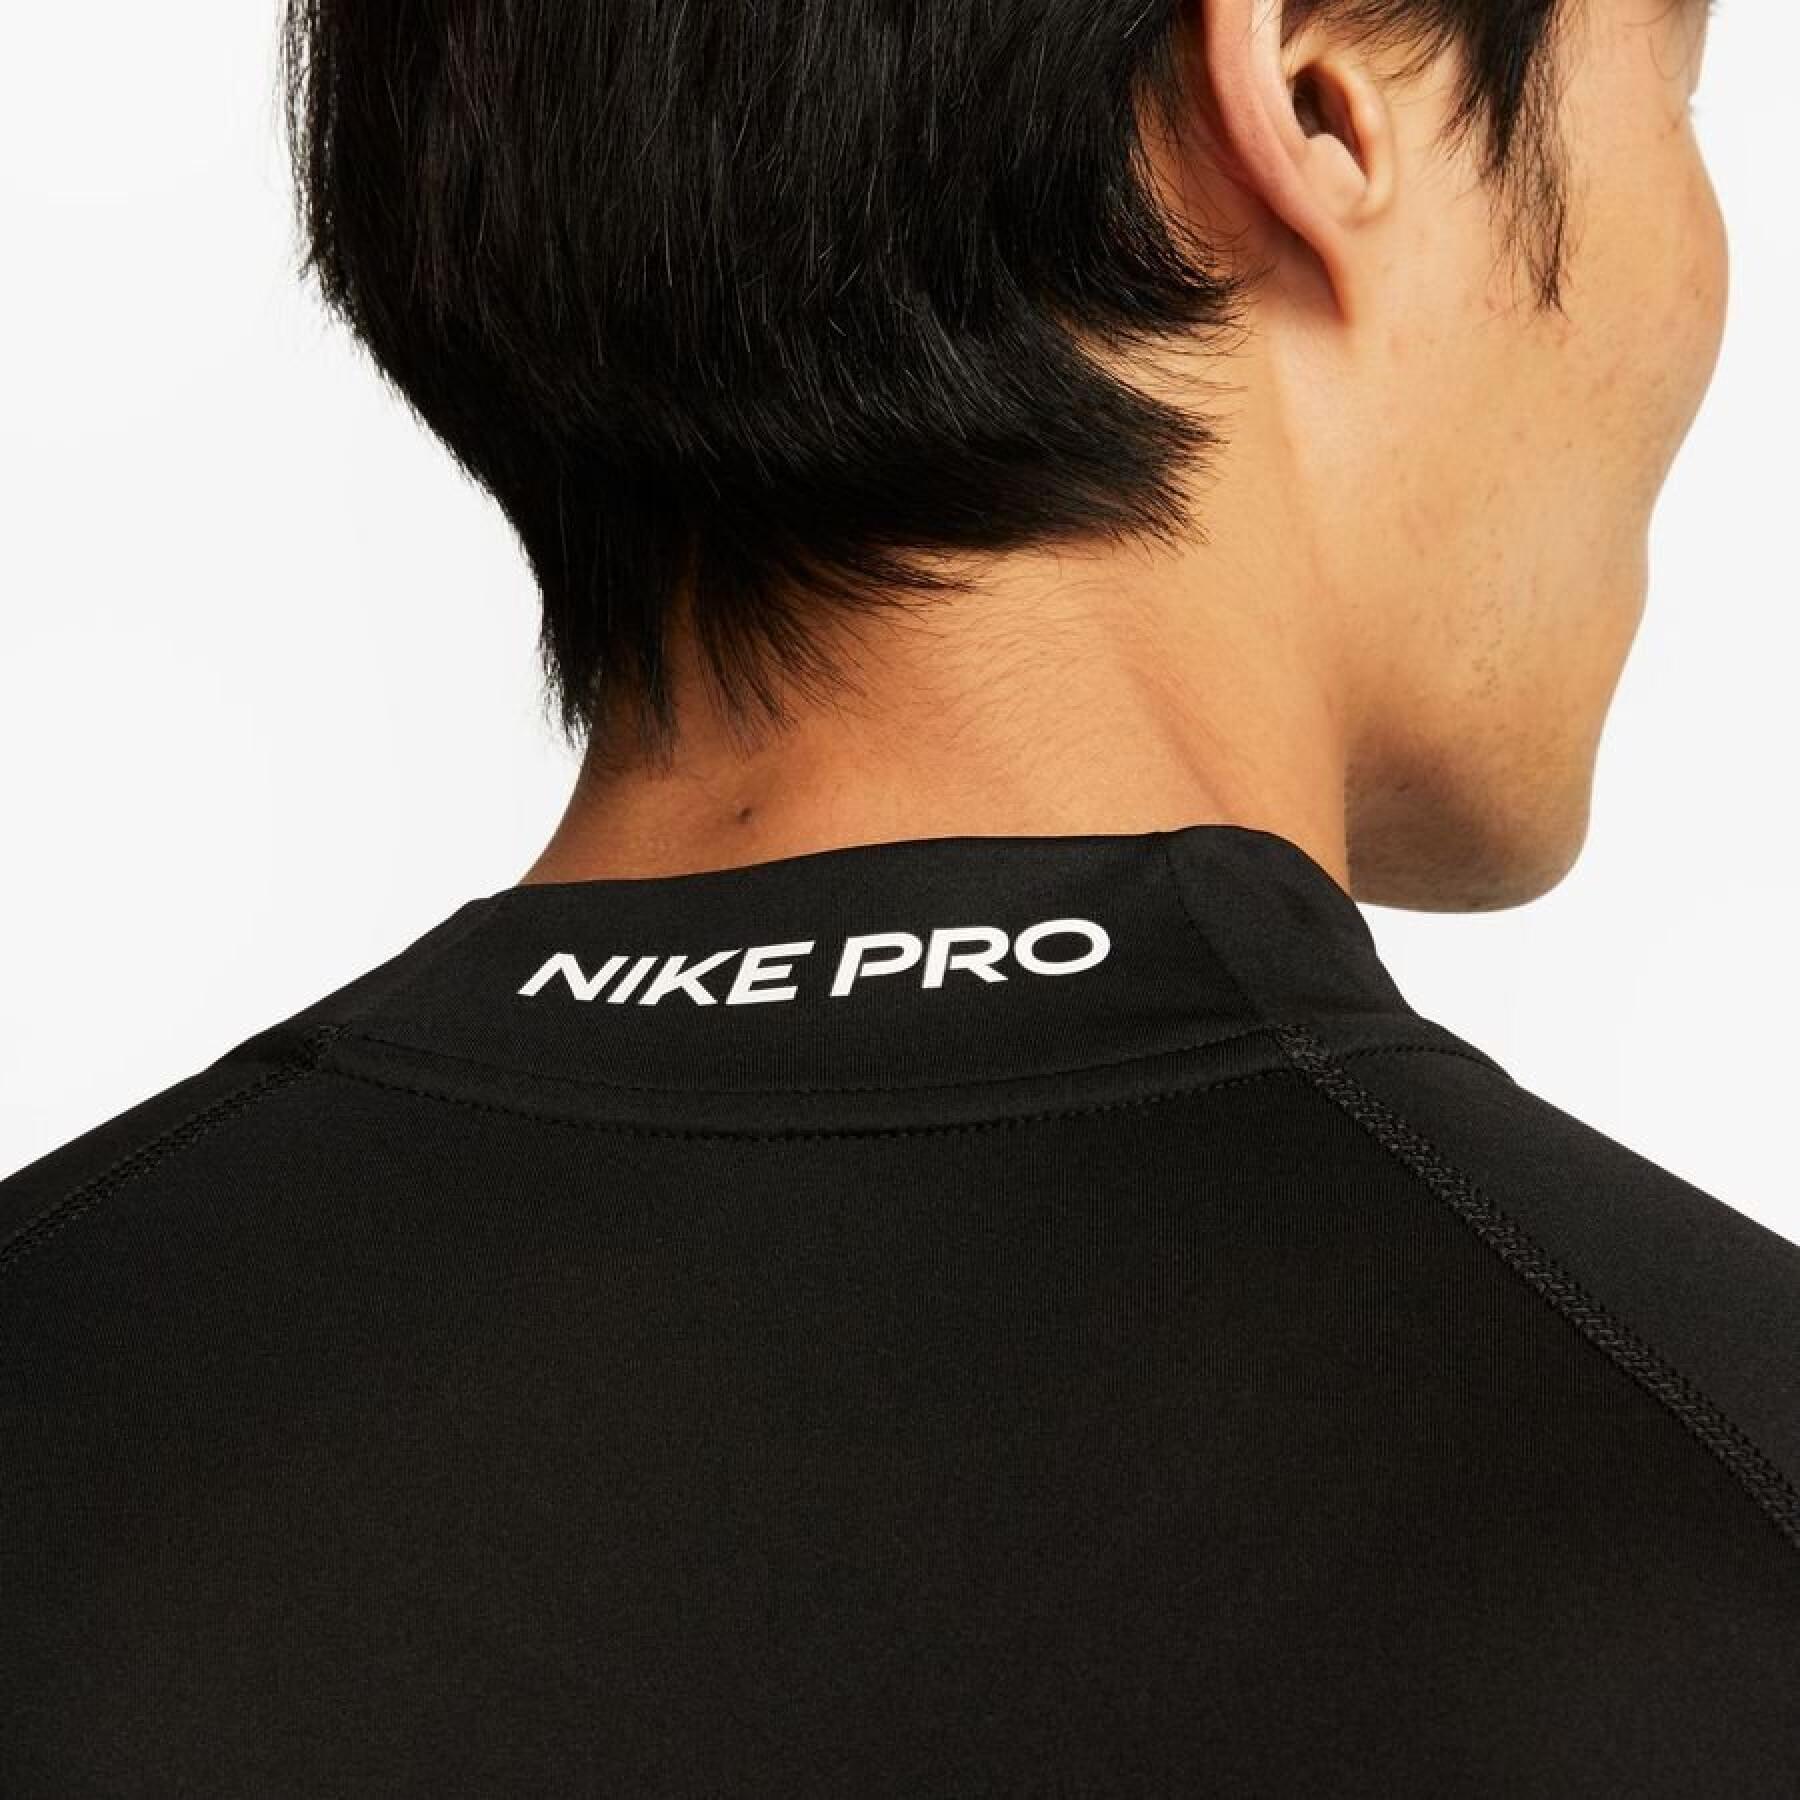 Long-sleeved tight-fitting jersey Nike Dri-FIT Mock